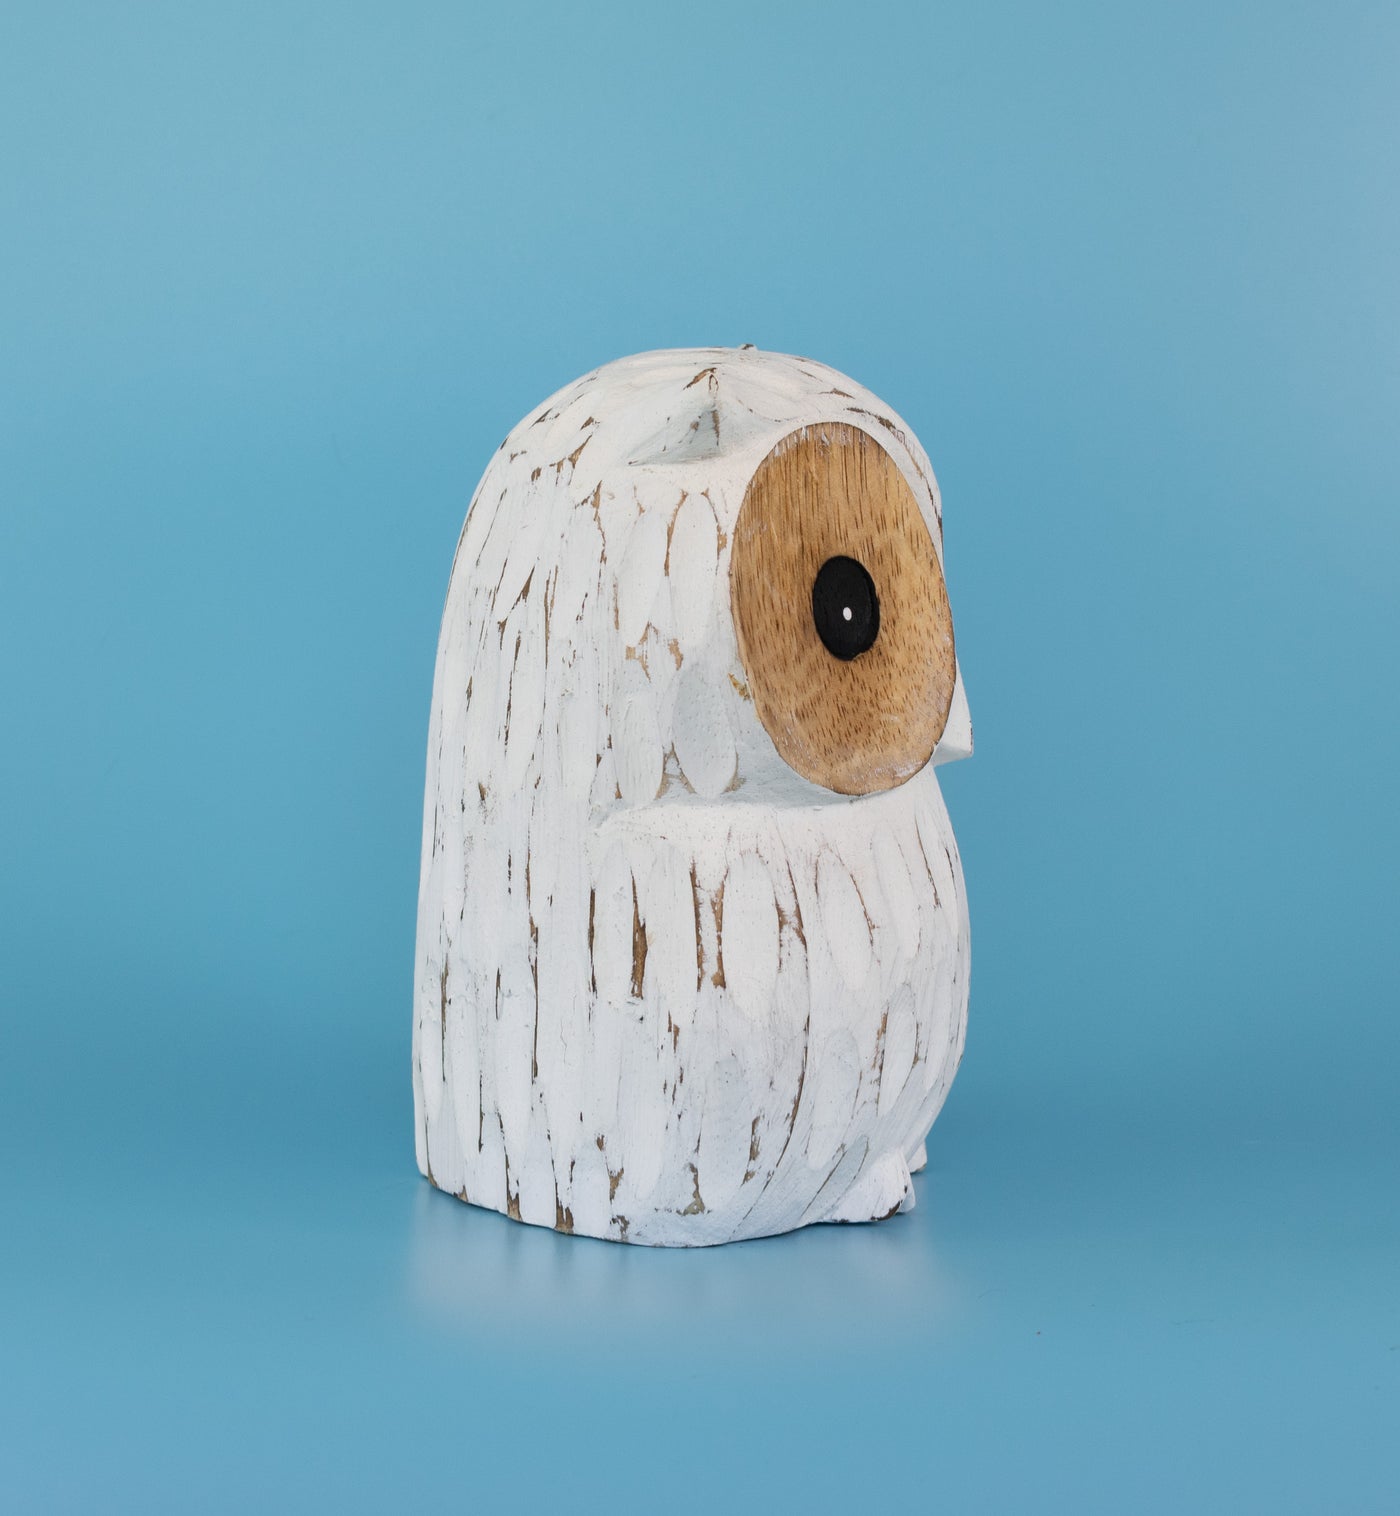 Handmade White-Washed Wooden Owl Statue Figurine Hoot Sculpture Art Home Decor Accent Handcrafted Decoration